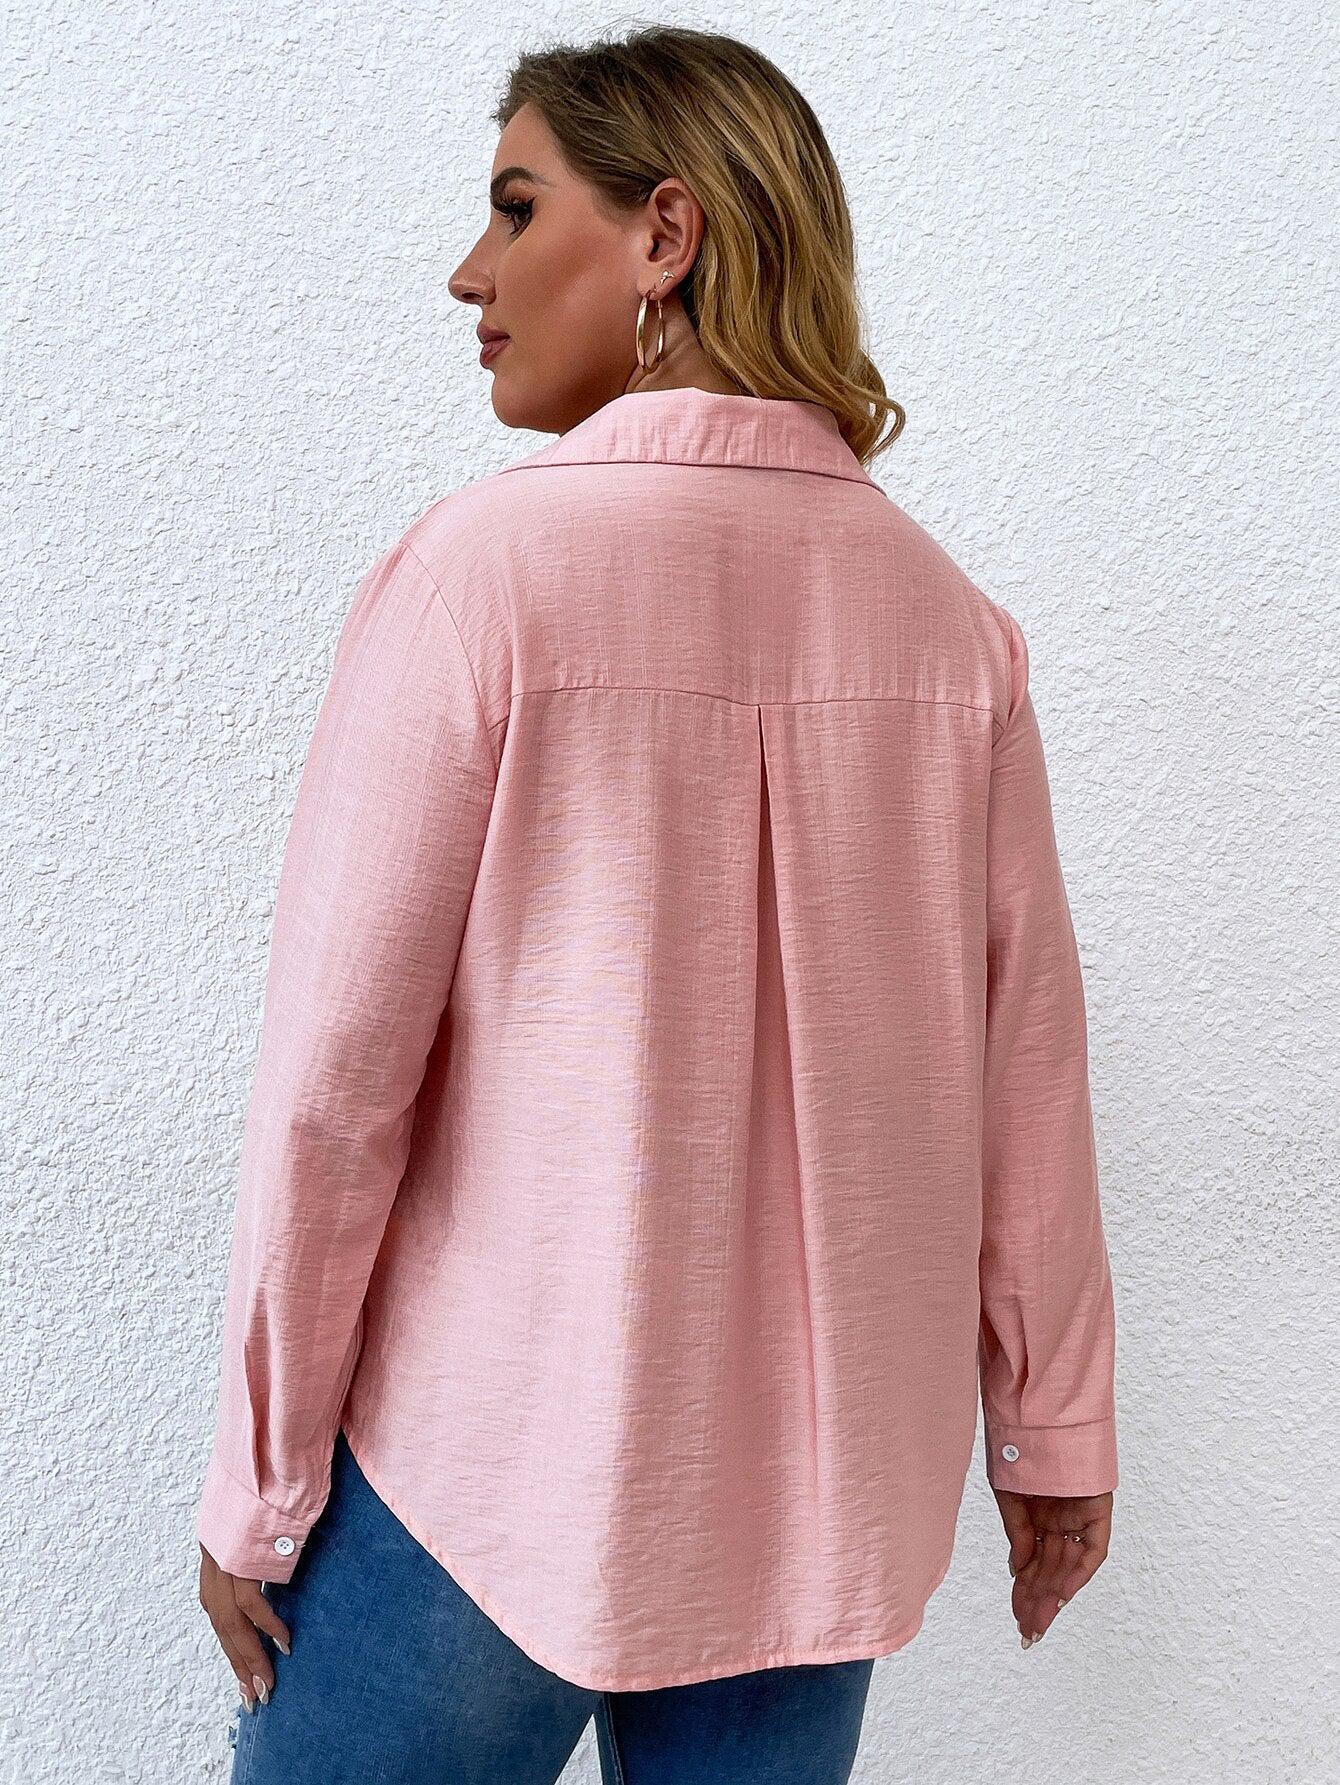 Women's Fashion Solid Pink Long Sleeve Casual Tops BENNYS 